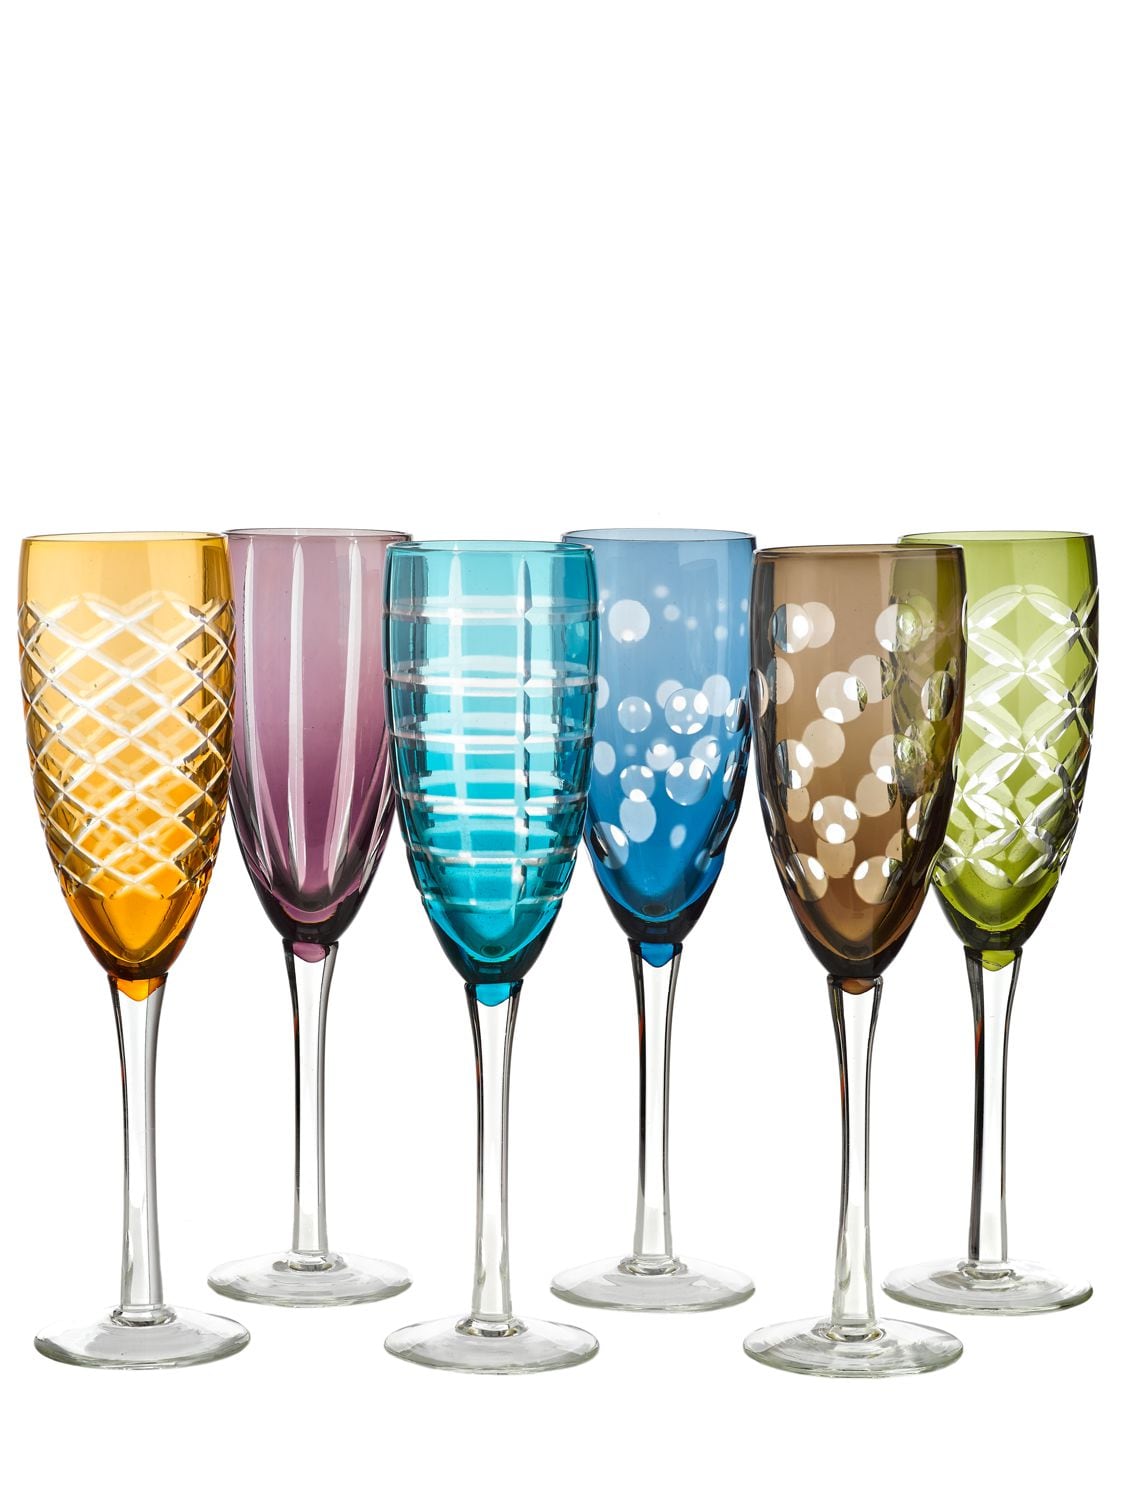 Polspotten Tie Up Set Of 6 Champagne Flutes In Multicolor